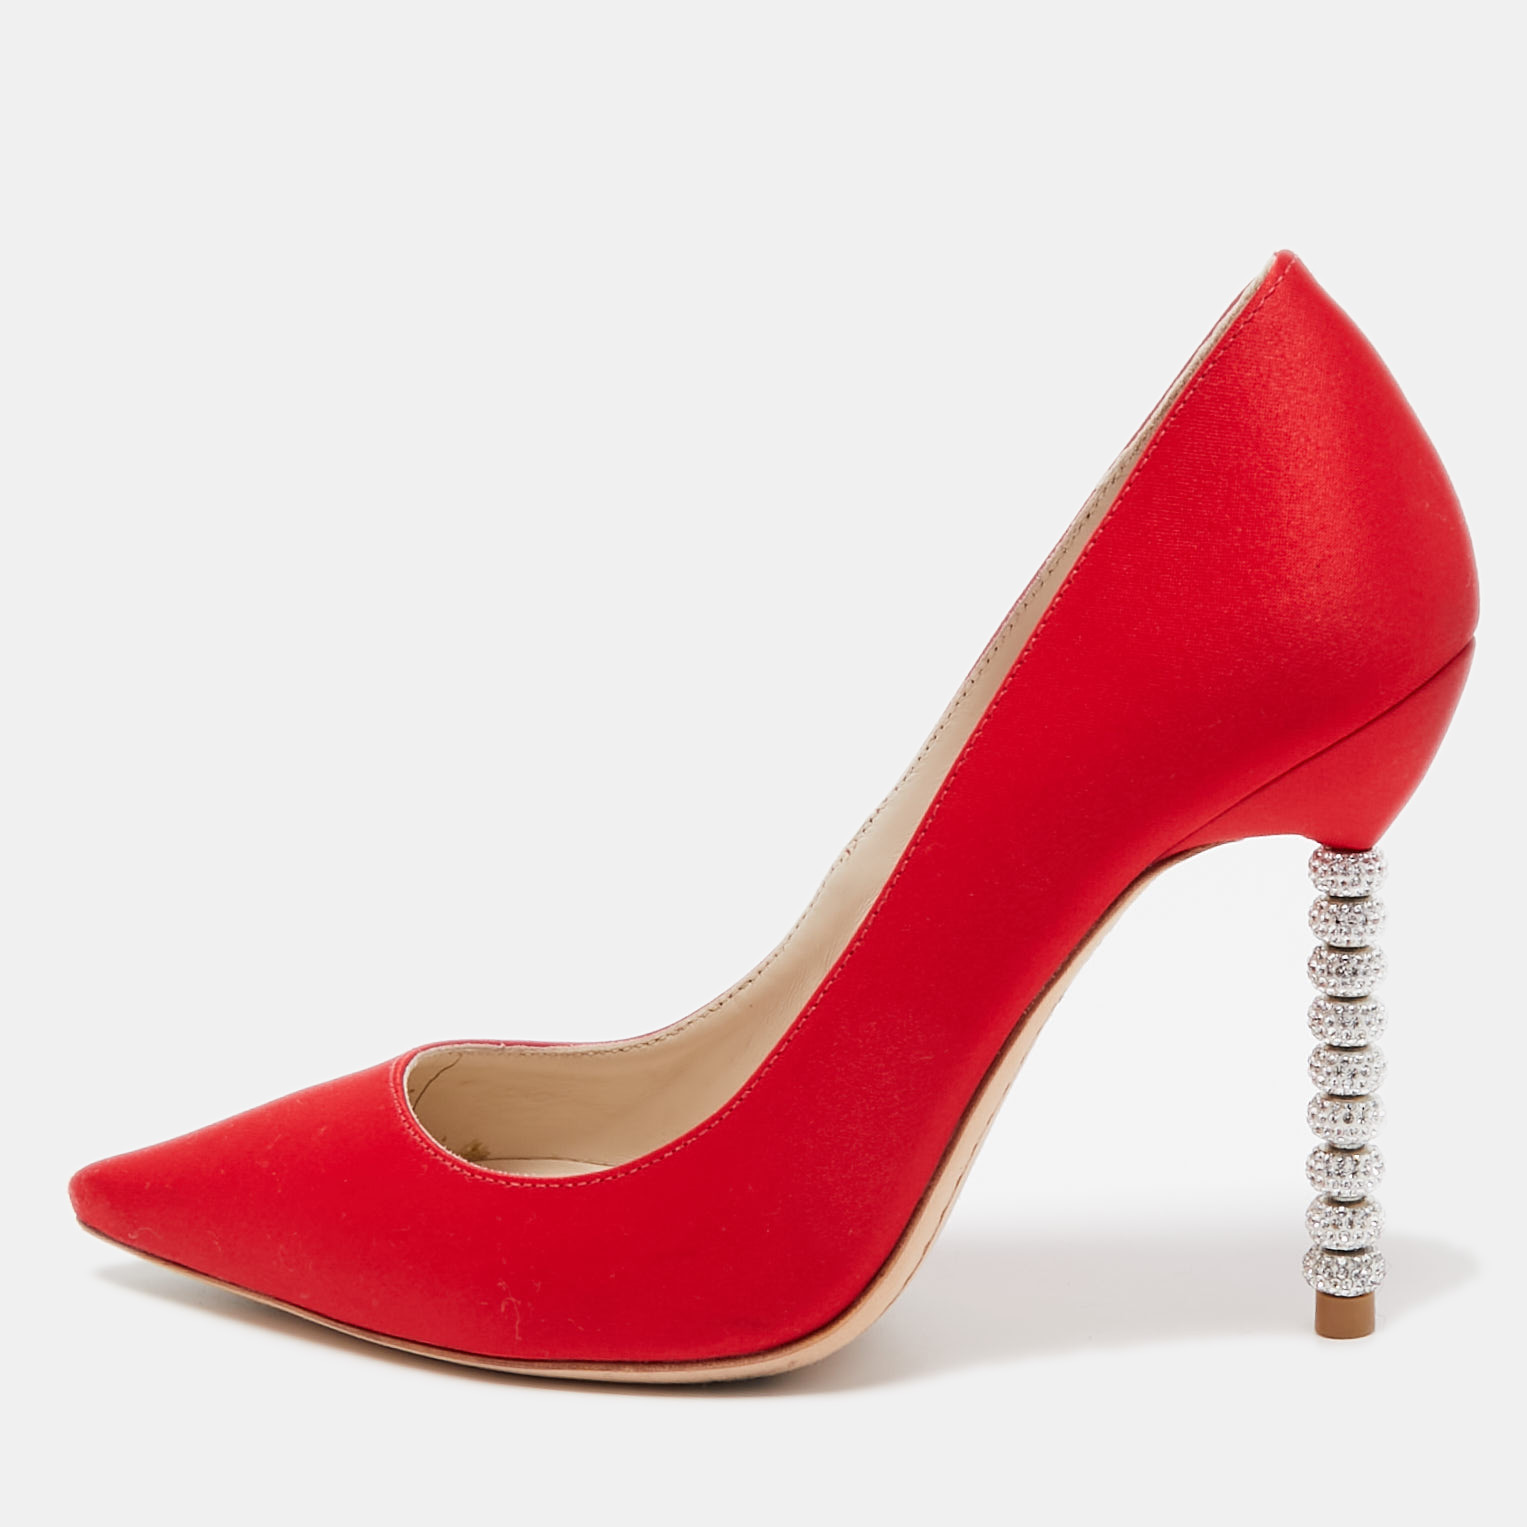 Sophia webster red satin coco crystal pumps size 36.5